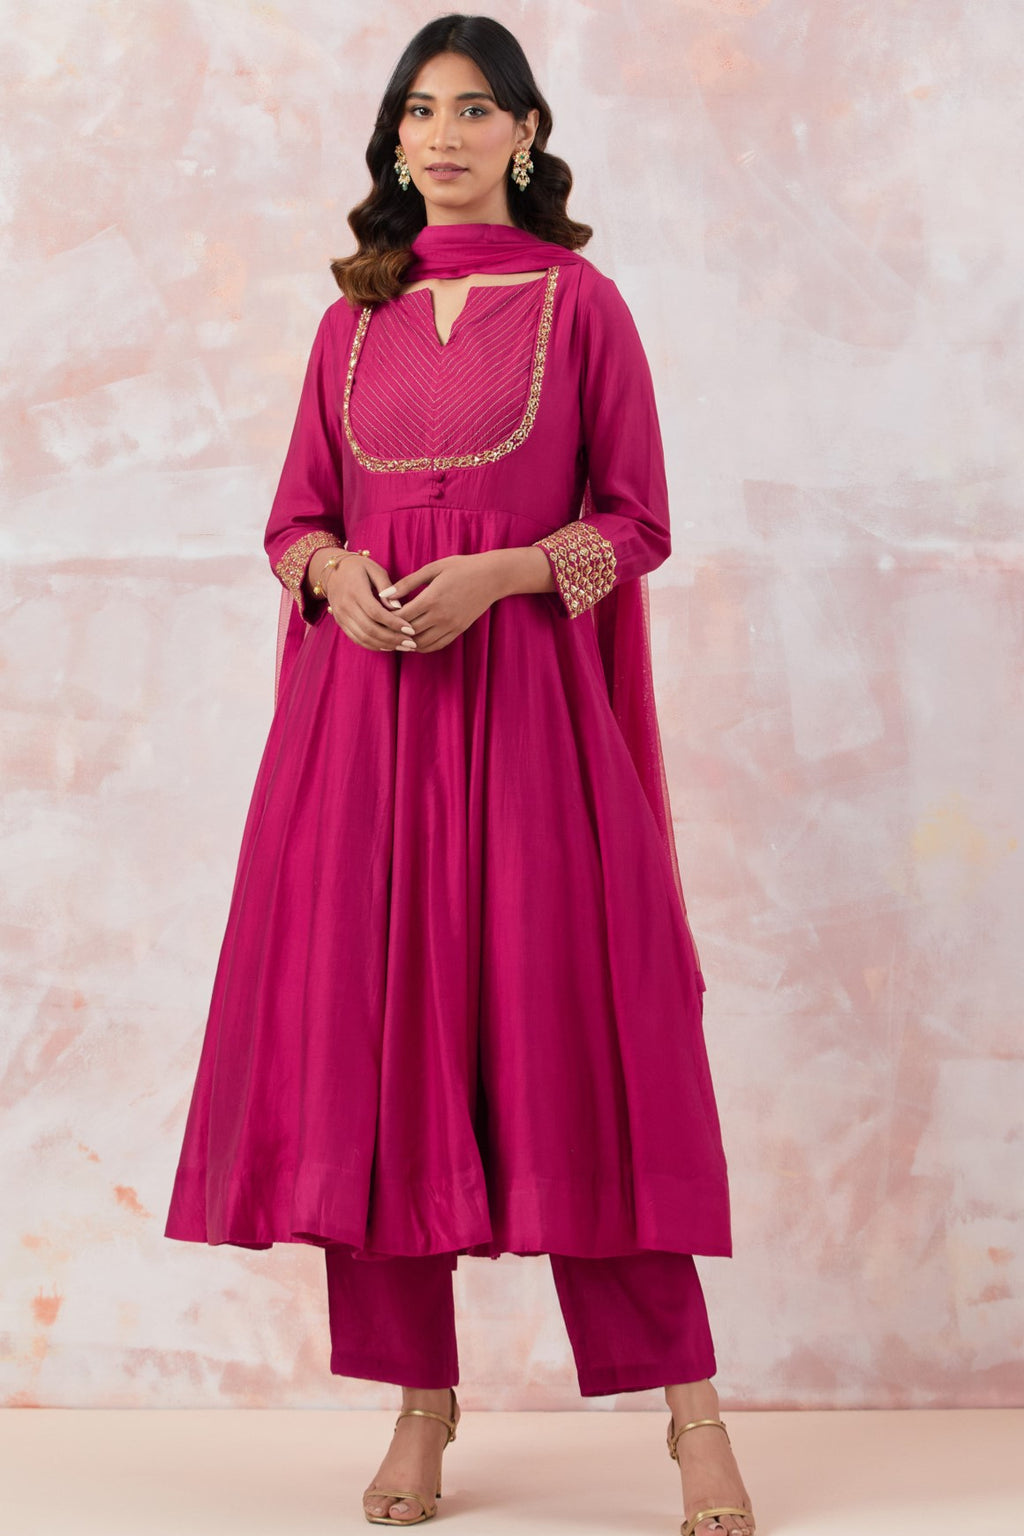 Buy a Pink Anarkali suit set with straight pants and a dupatta. It also has embroidery on the neck and sleeves. It is best suited for small parties. Dazzle on weddings and special occasions with exquisite Indian designer dresses, sharara suits, Anarkali suits, and wedding lehengas from Pure Elegance Indian fashion store in the USA.